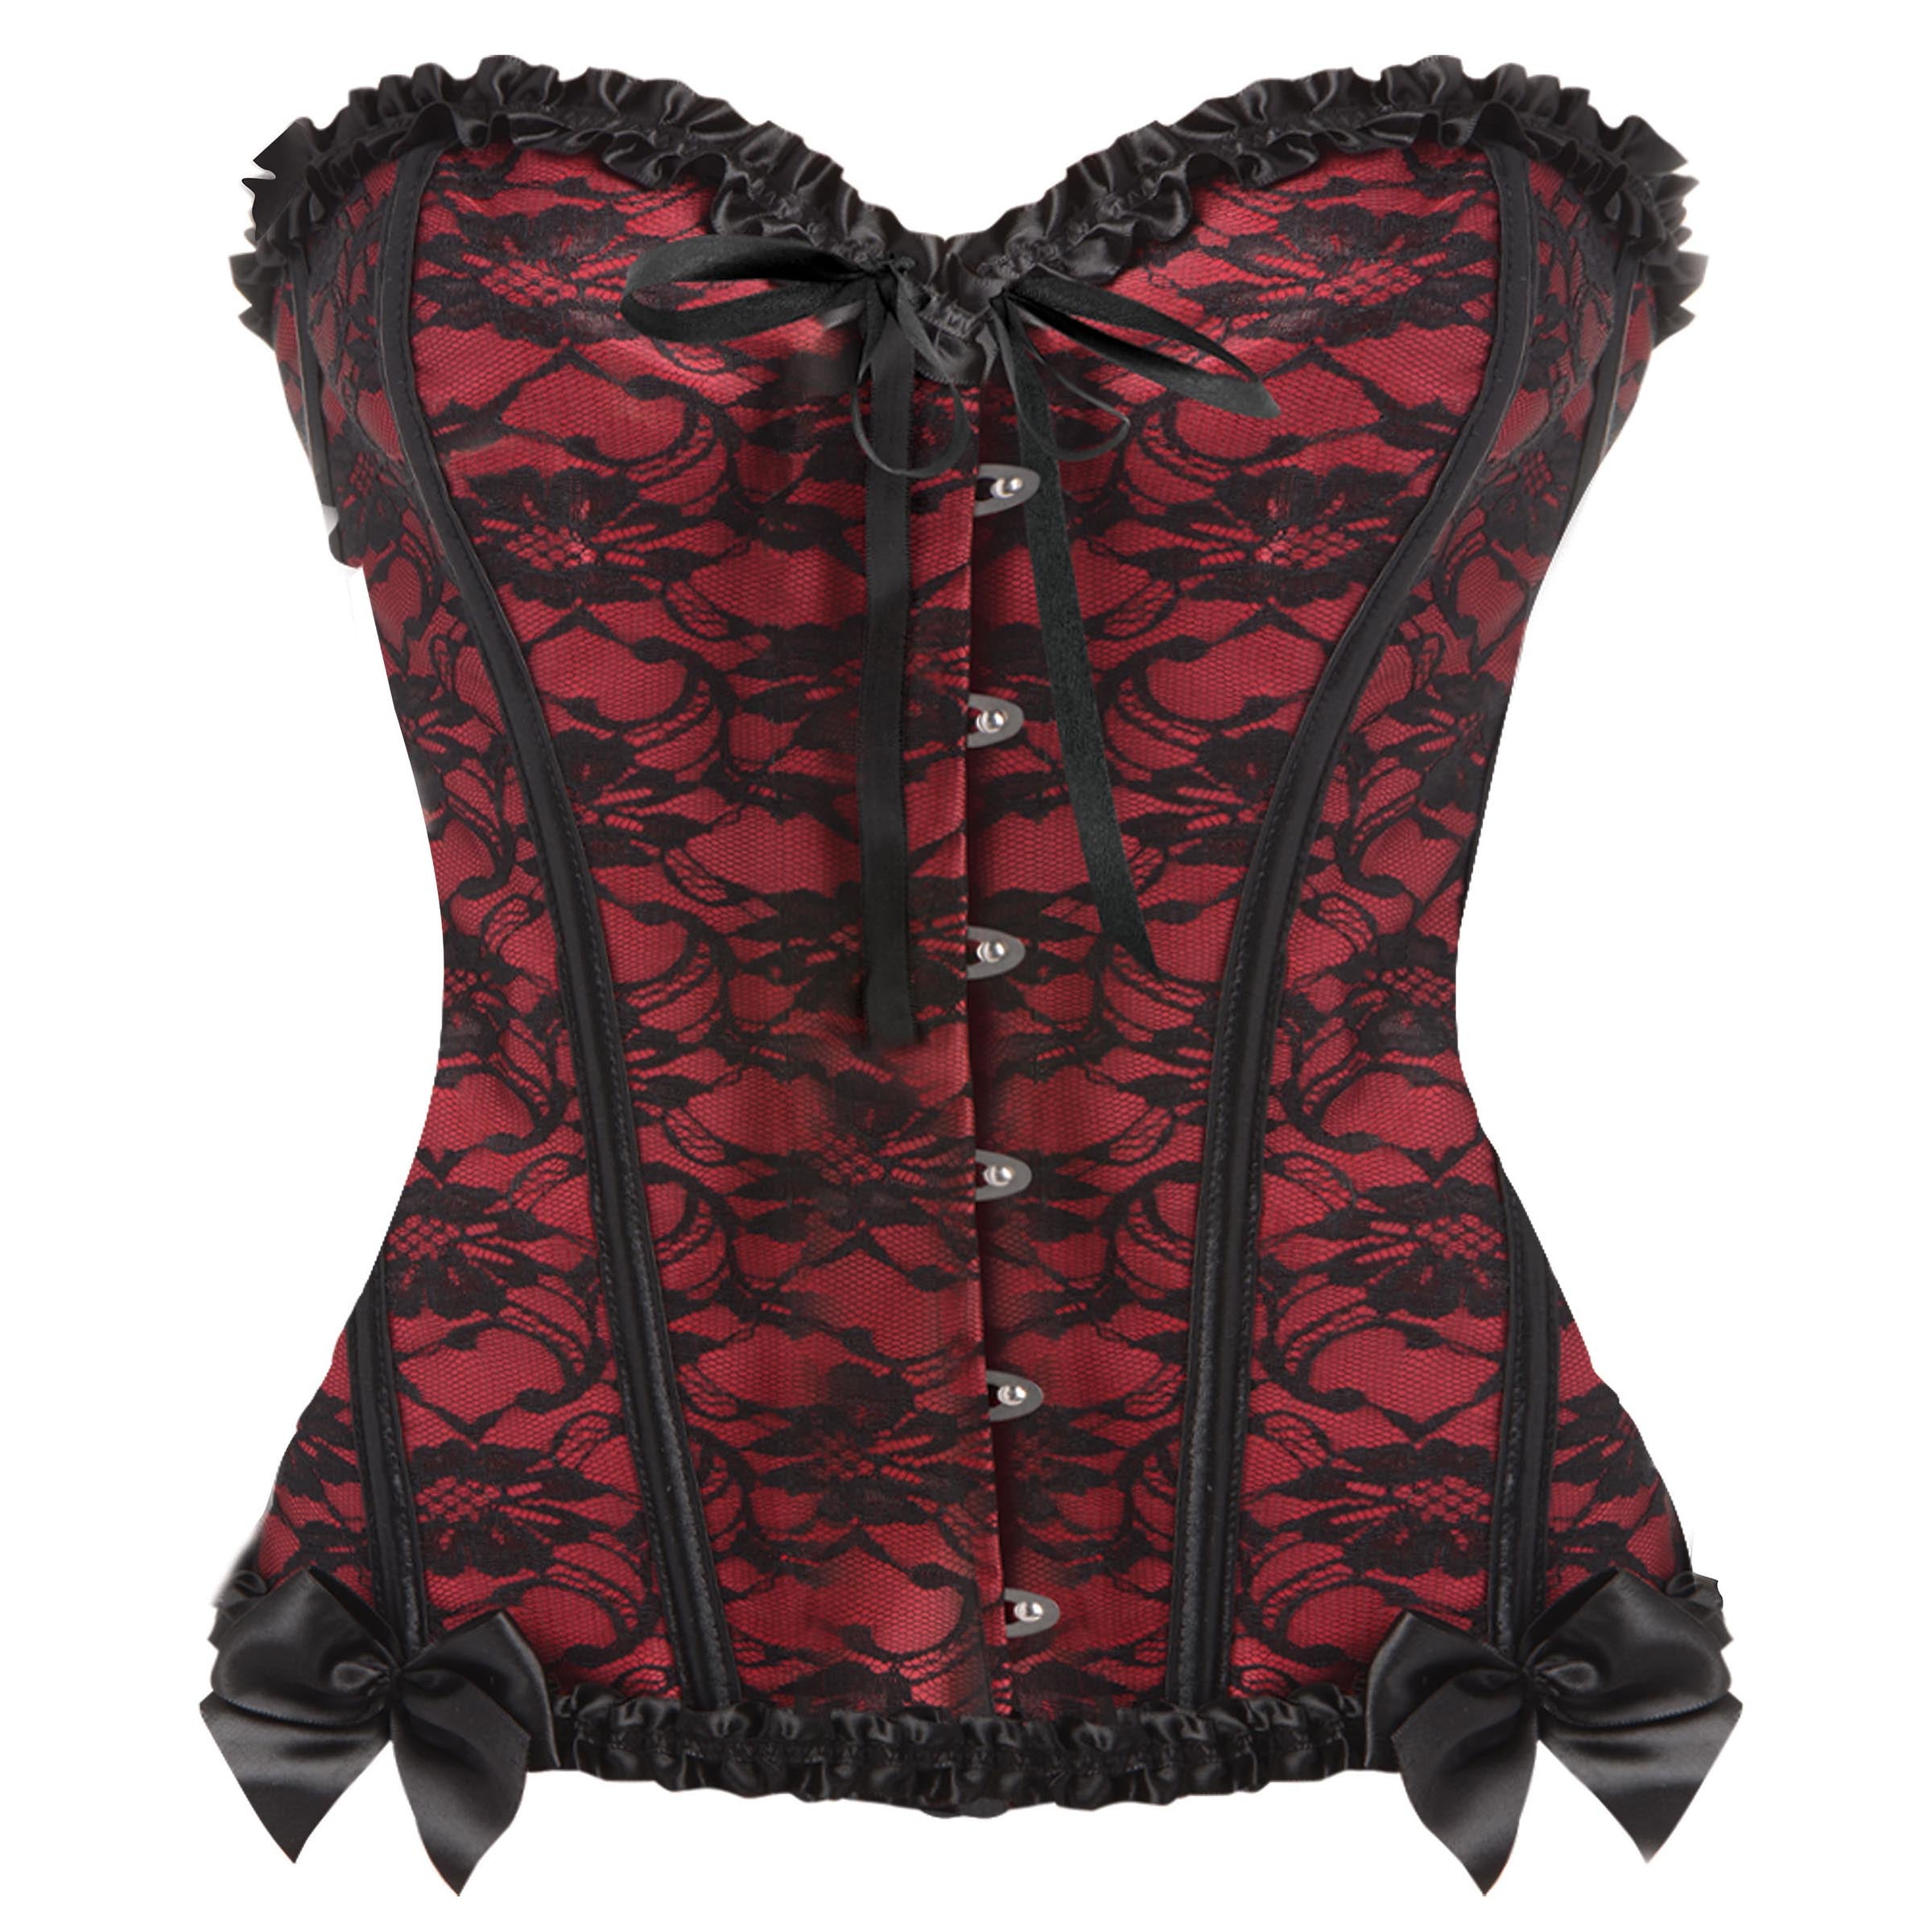 Scarlet Seduction Lace-up Corset and Thong